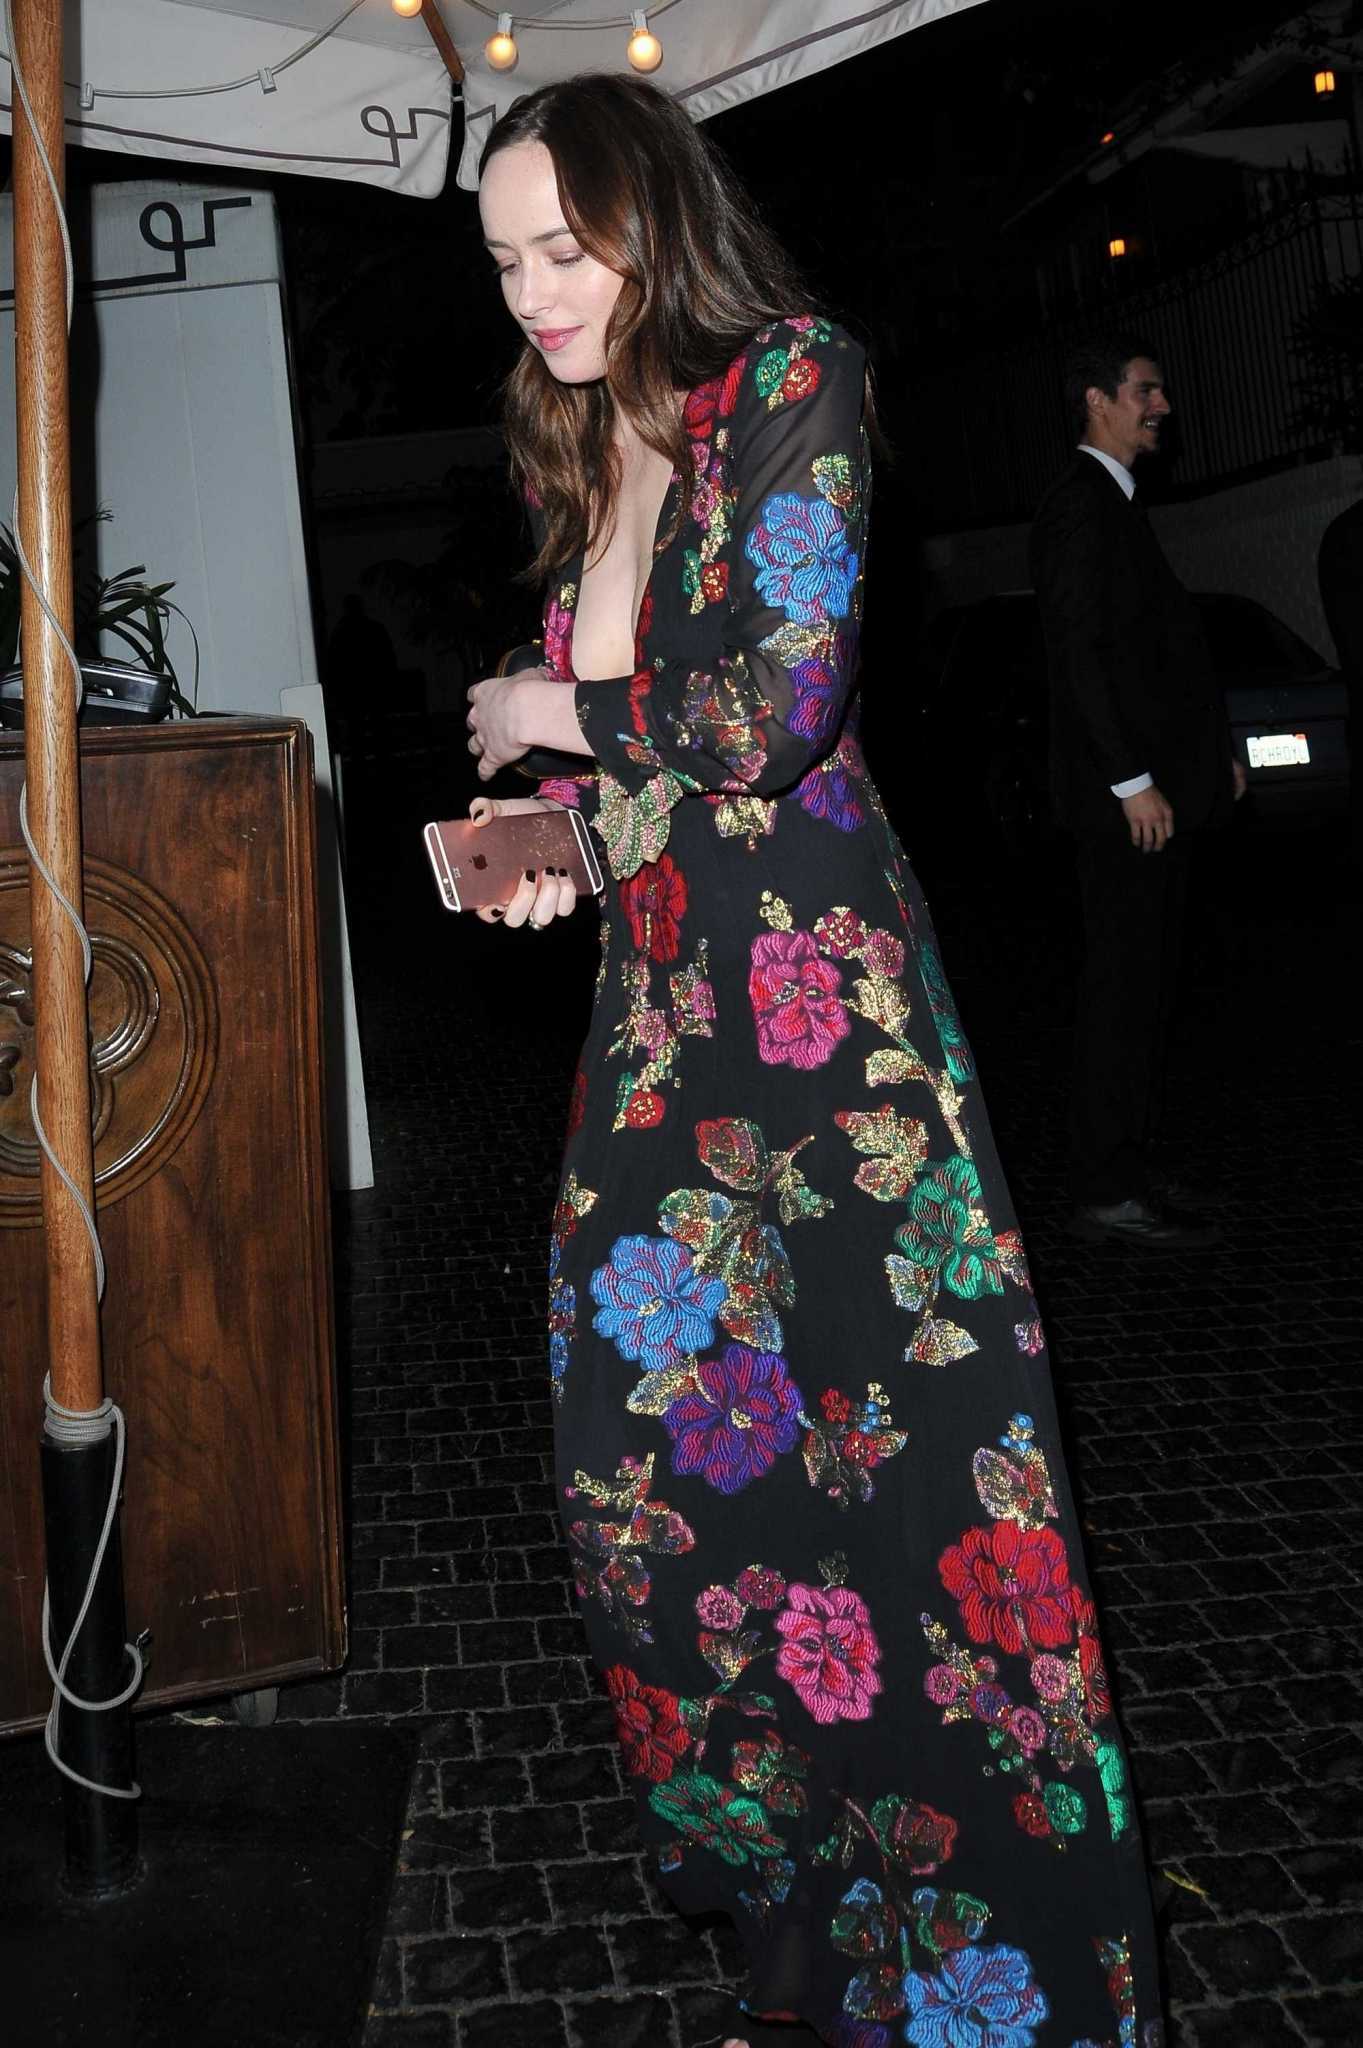 Dakota_Johnson_-_Leaving_the_Chateau_Marmont_in_West_Hollywood_on_March_25-12.jpg